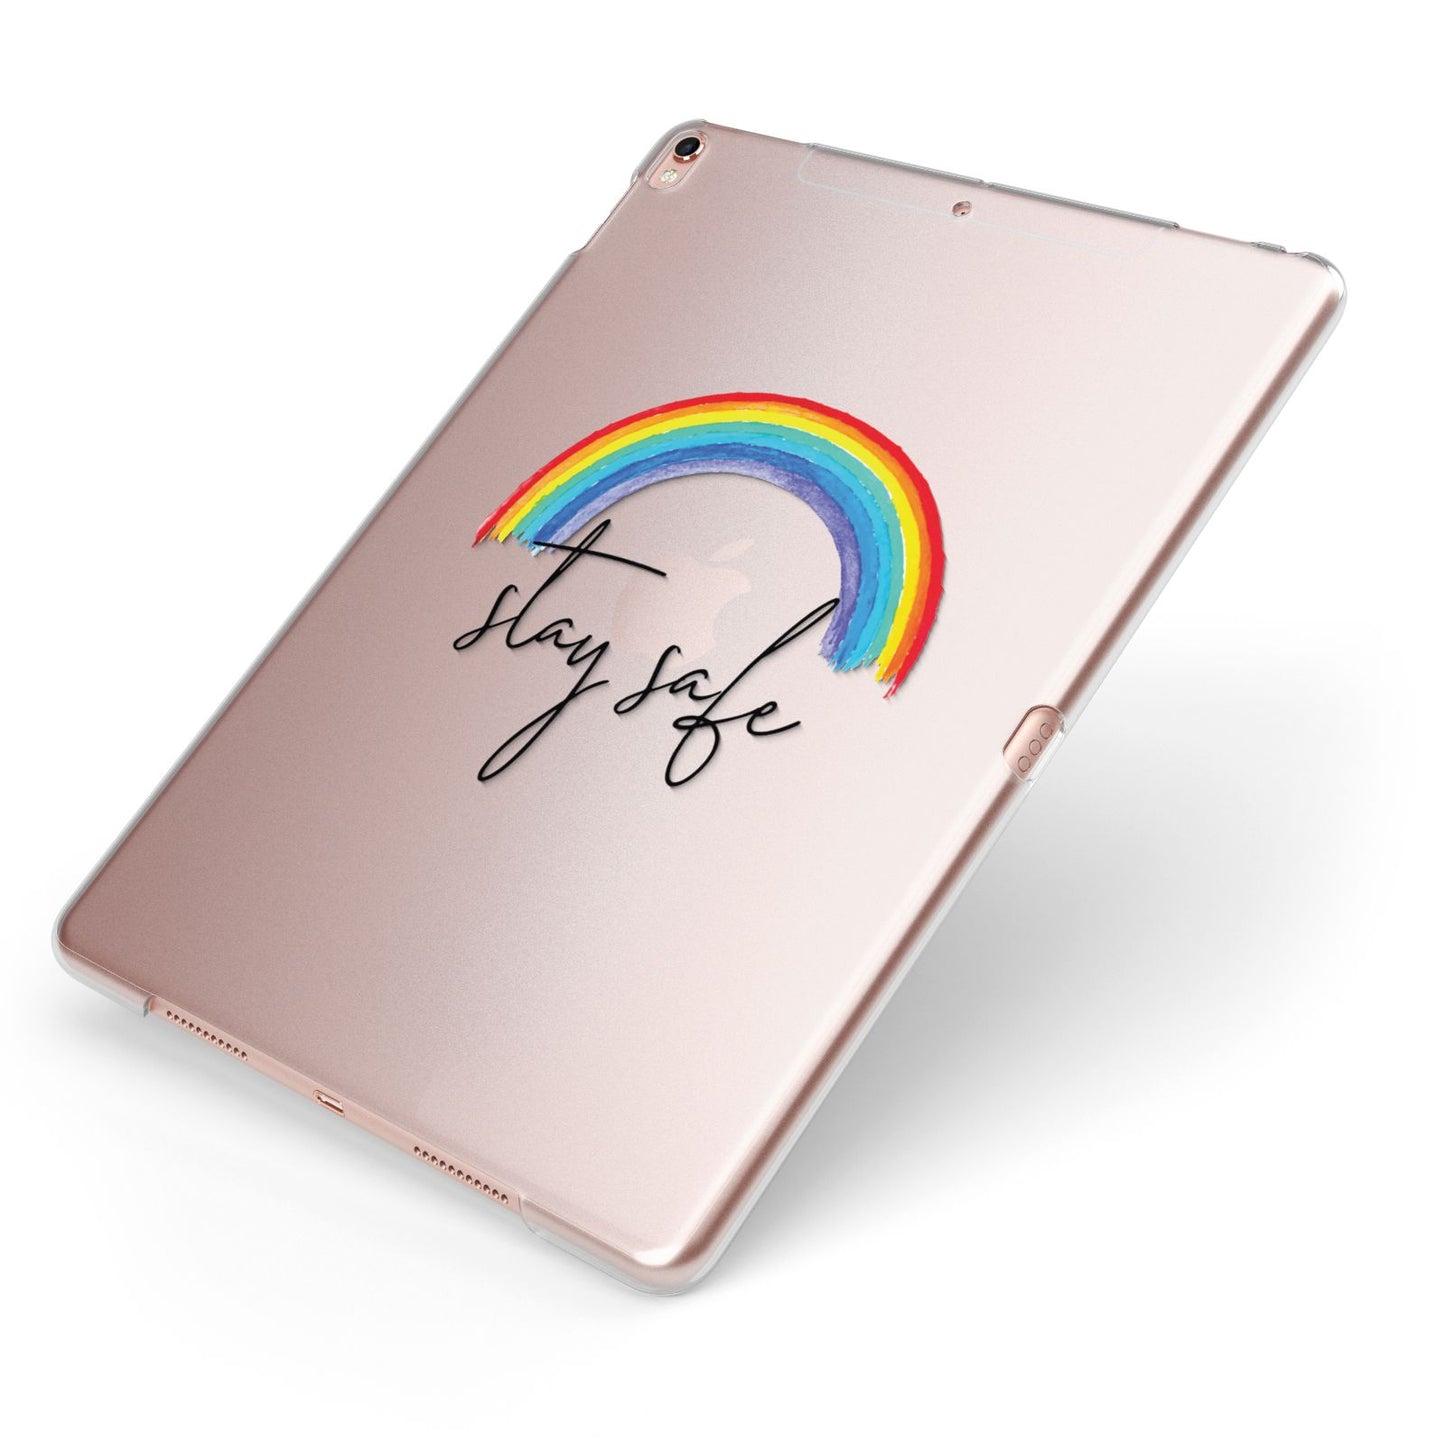 Stay Safe Rainbow Apple iPad Case on Rose Gold iPad Side View